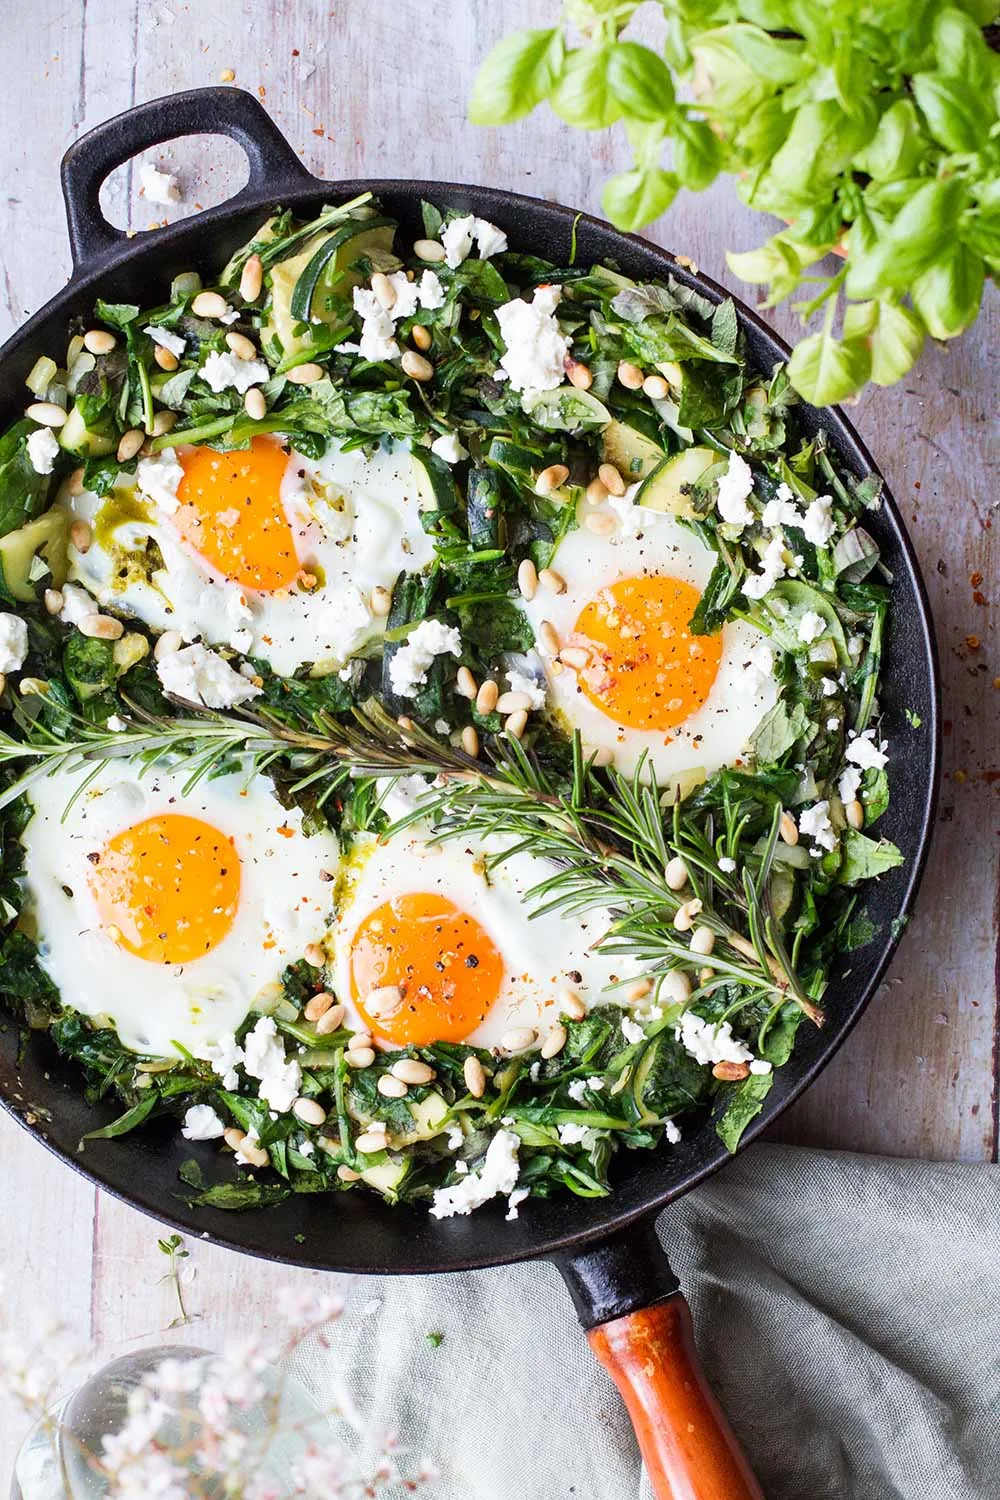 Cast iron skillet with green spinach bed and four sunny-side-up eggs.